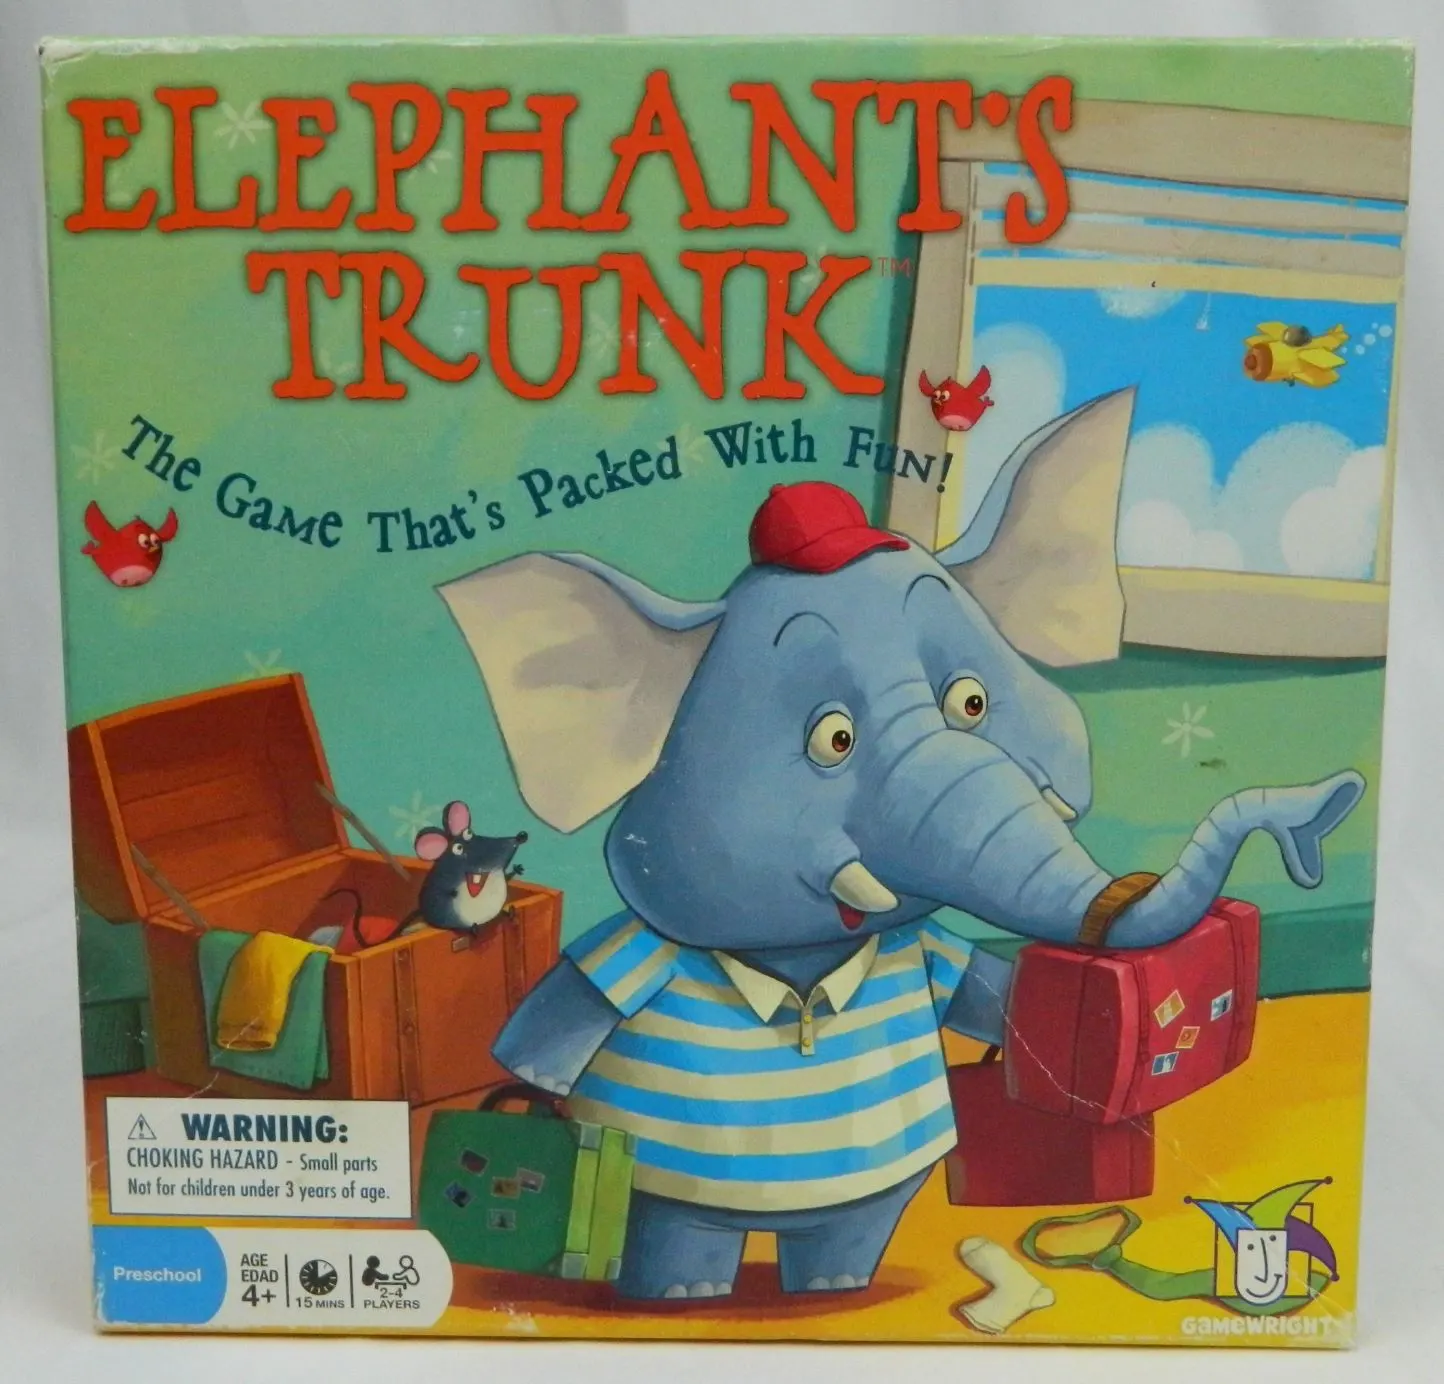 Box for Elephant's Trunk